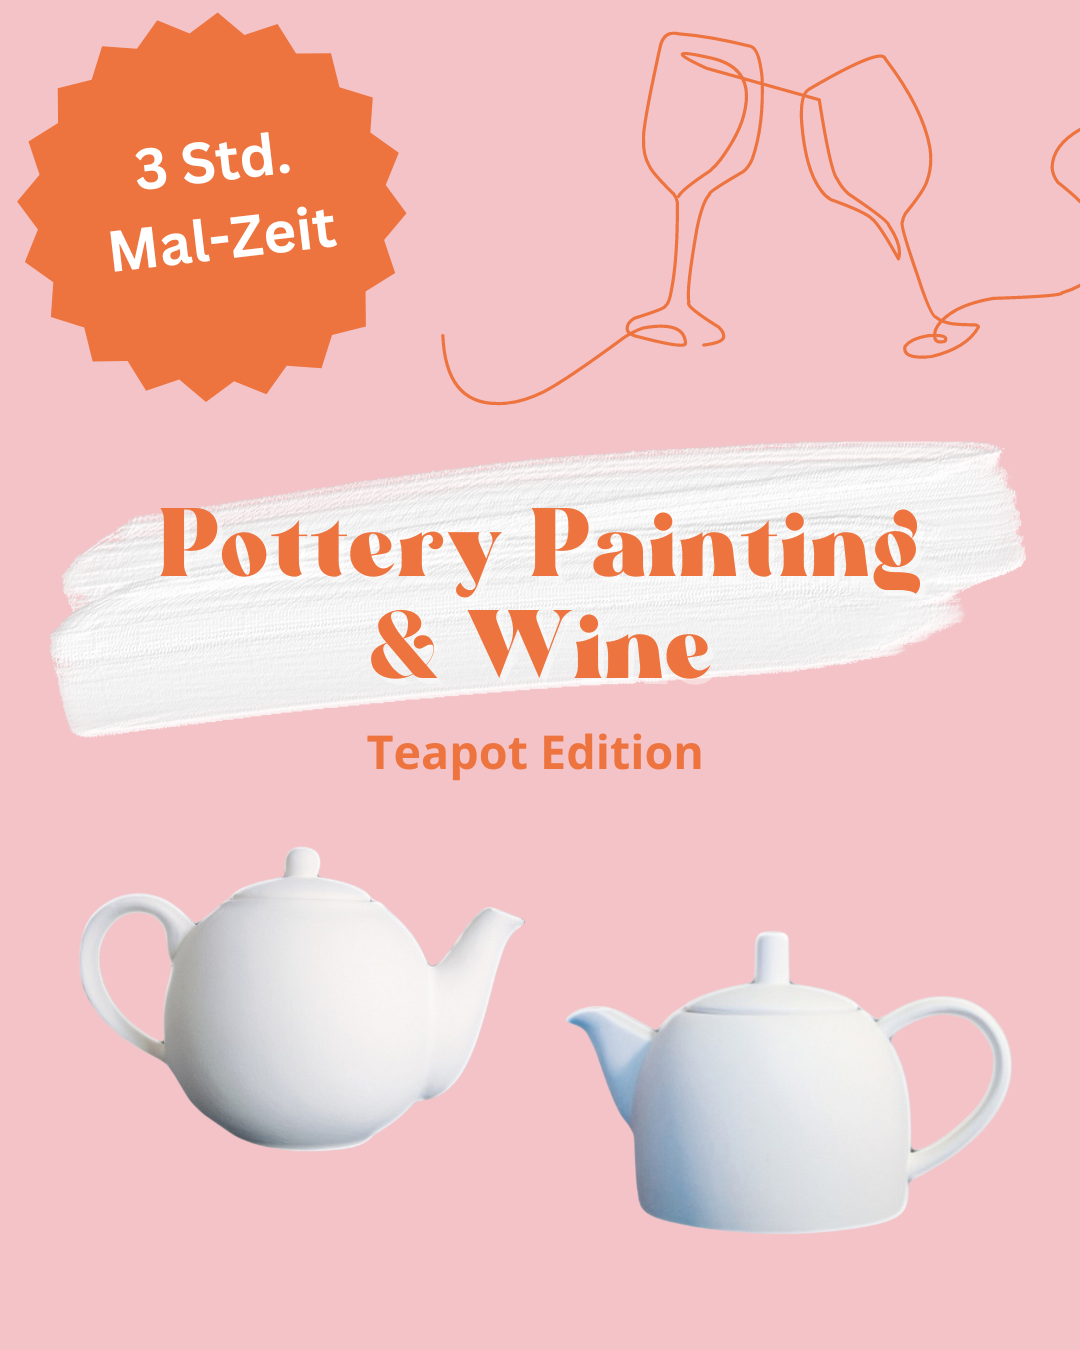 Pottery Painting & Wine - Teapot Edition